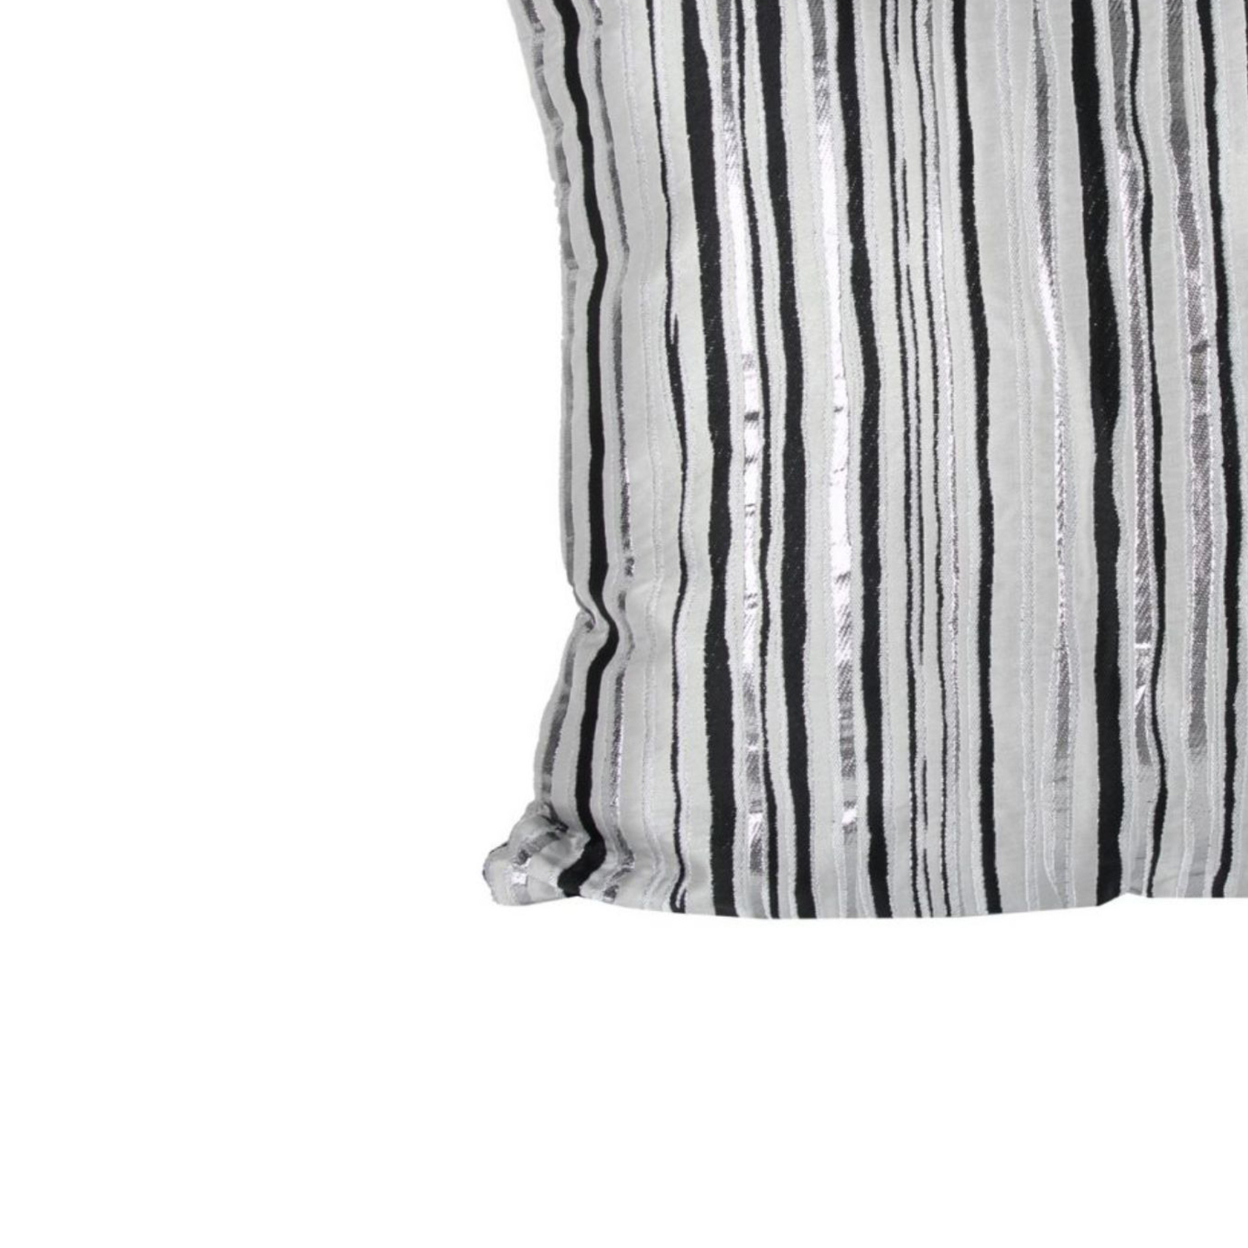 Fabric Accent Pillow With Unique Striped Pattern, Gray And Black- Saltoro Sherpi